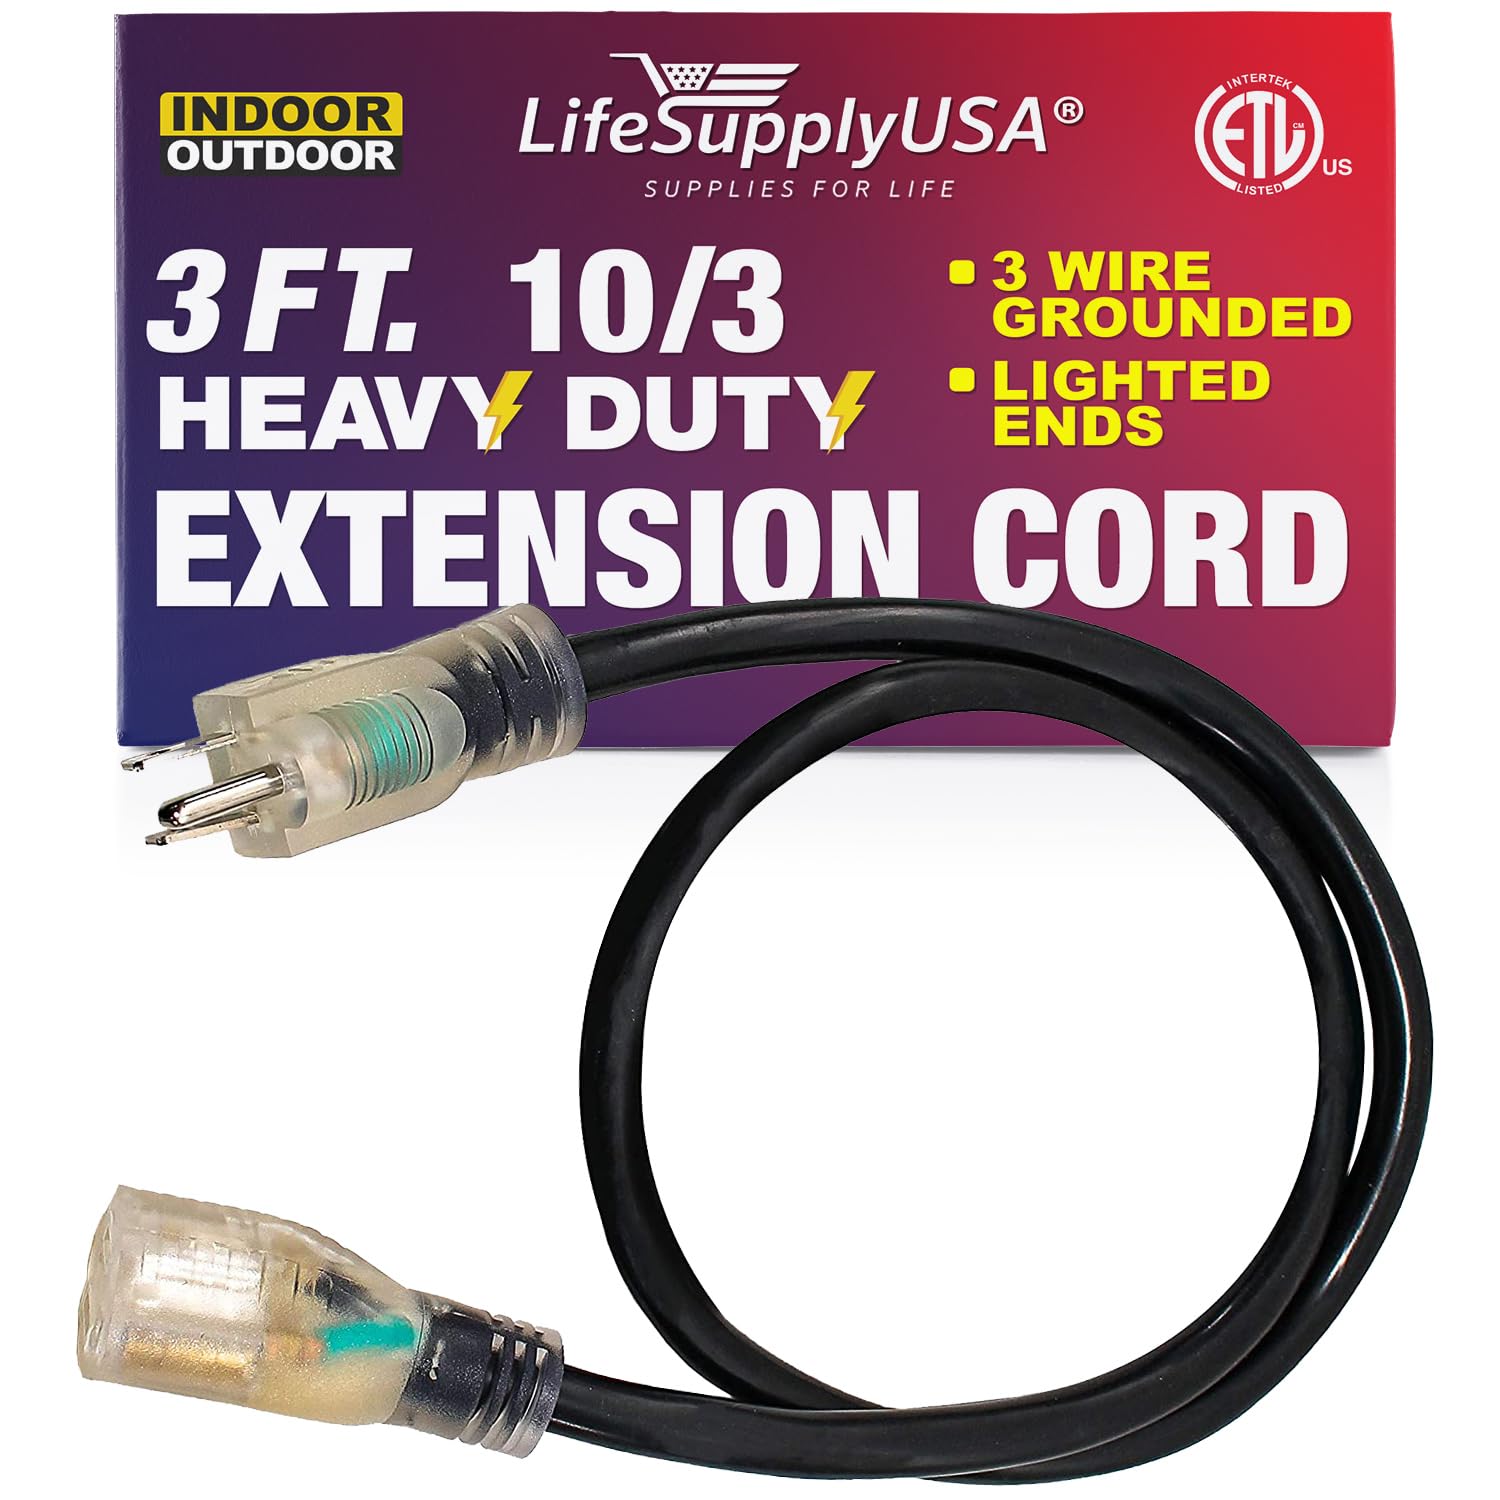 ft Power Extension Cord Outdoor  Indoor Heavy Duty 10 gauge/3 prong SJTW  (Black) Lighted end Extra Durability 15 AMP 125 Volts 1875 Watts ETL listed  by LifeSupplyUSA